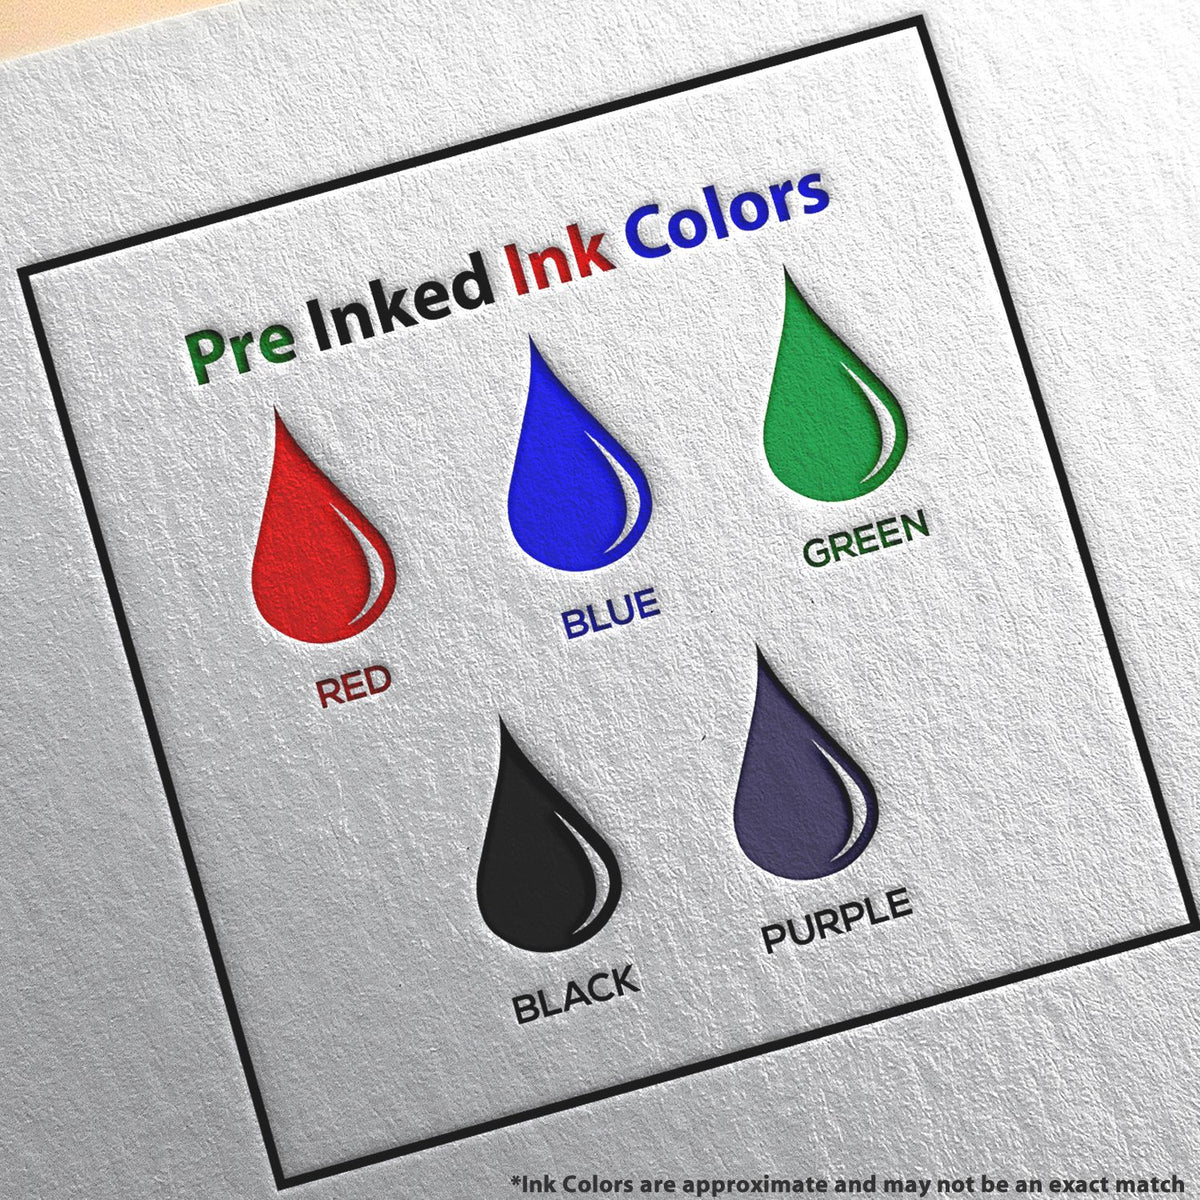 A picture showing the different ink colors or hues available for the Premium MaxLight Pre-Inked Illinois Engineering Stamp product.